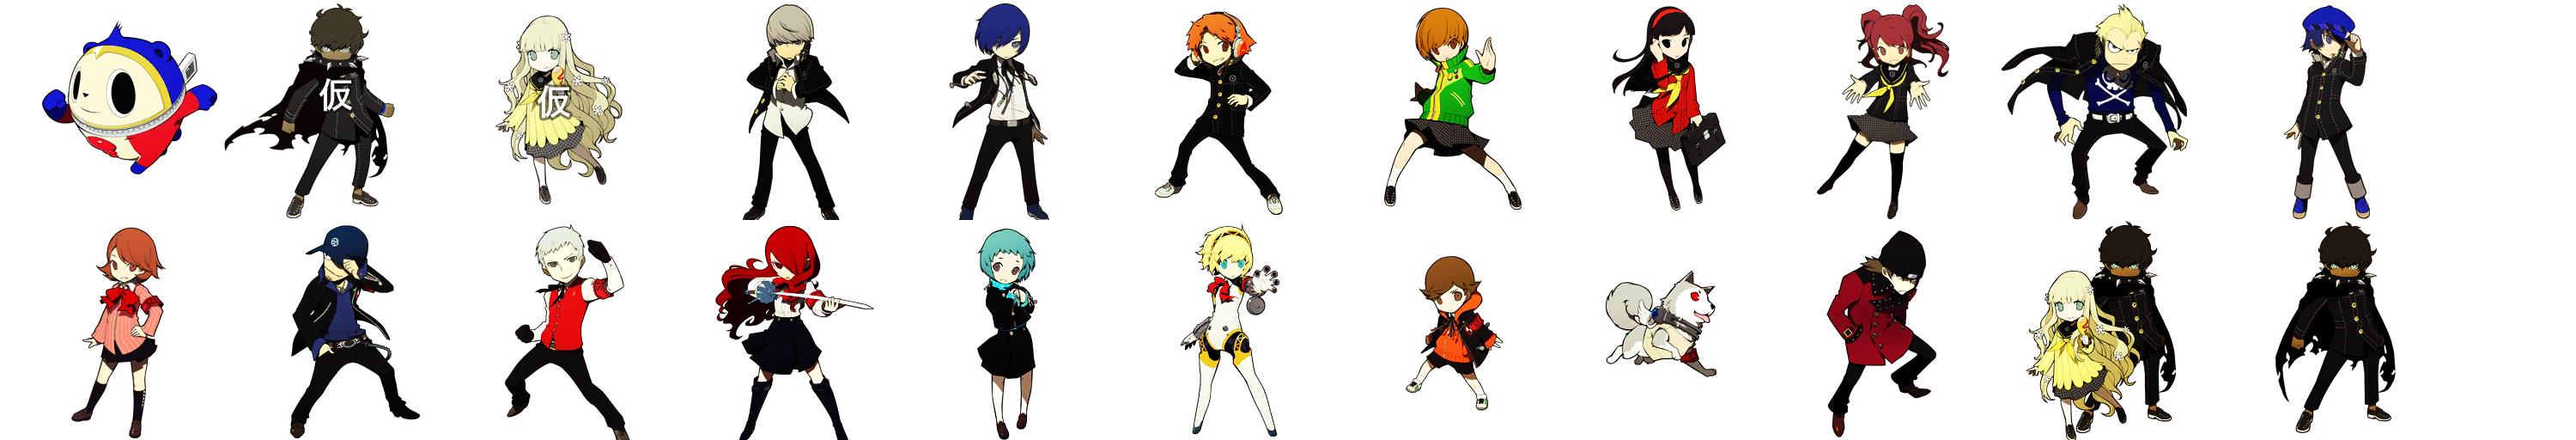 Persona Q: Shadow of the Laybrinth - Character Icons